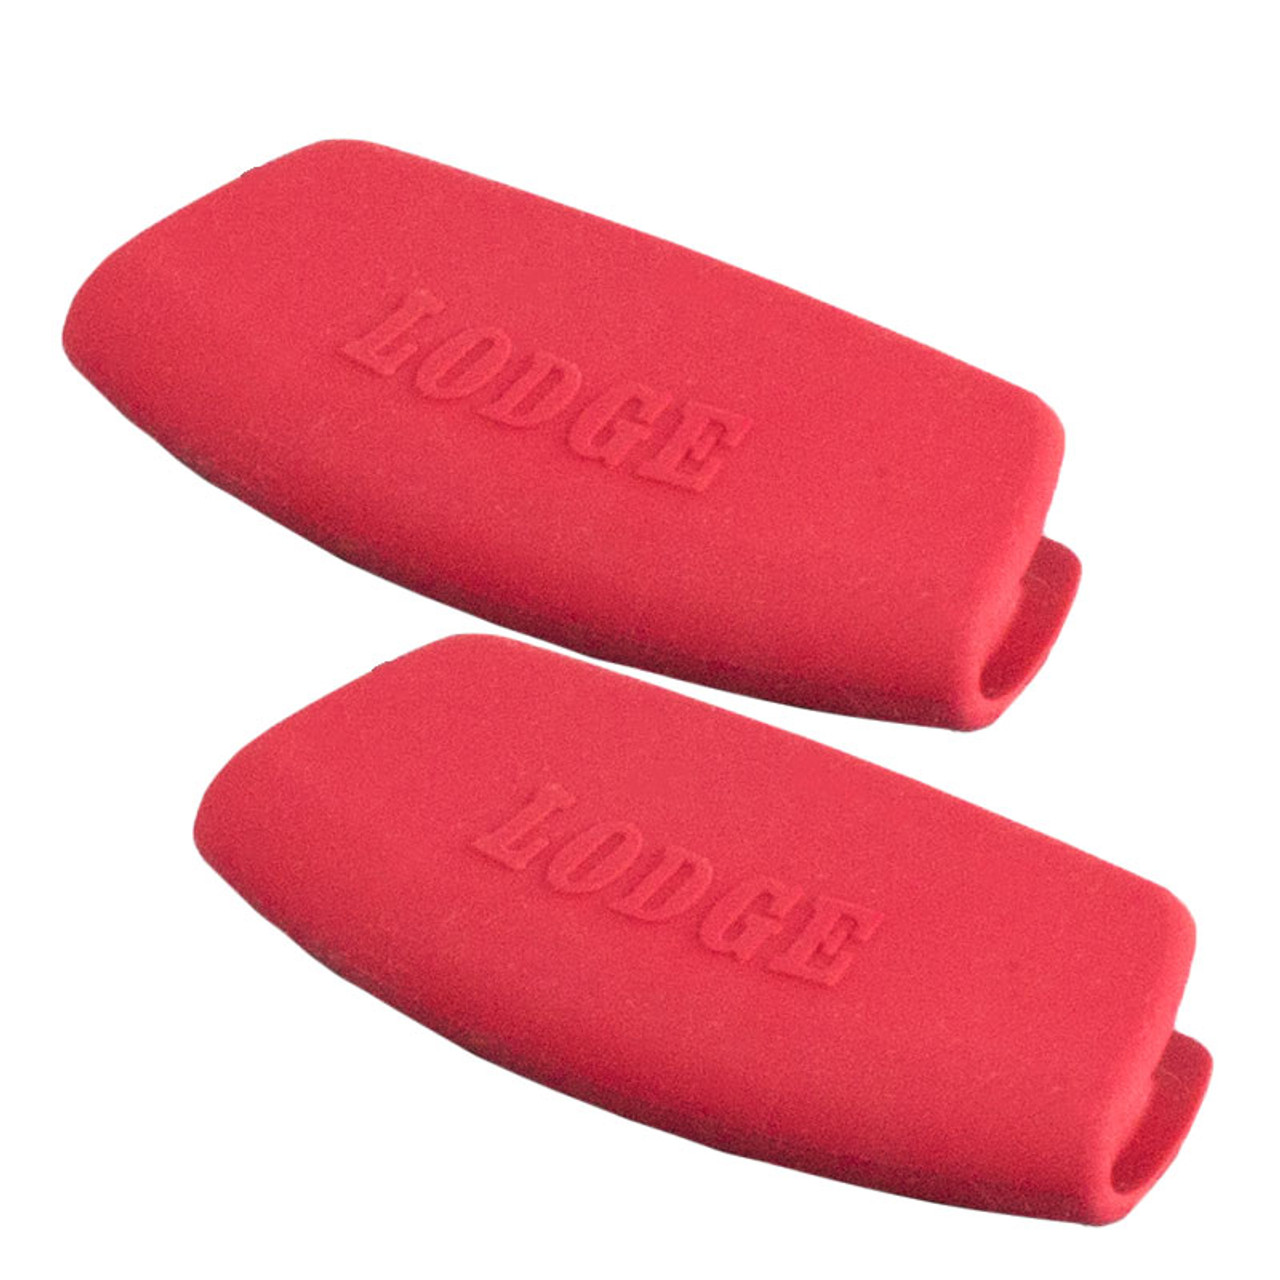 Bakeware Silicone Grips (Set of 2) - Lodge Cookware